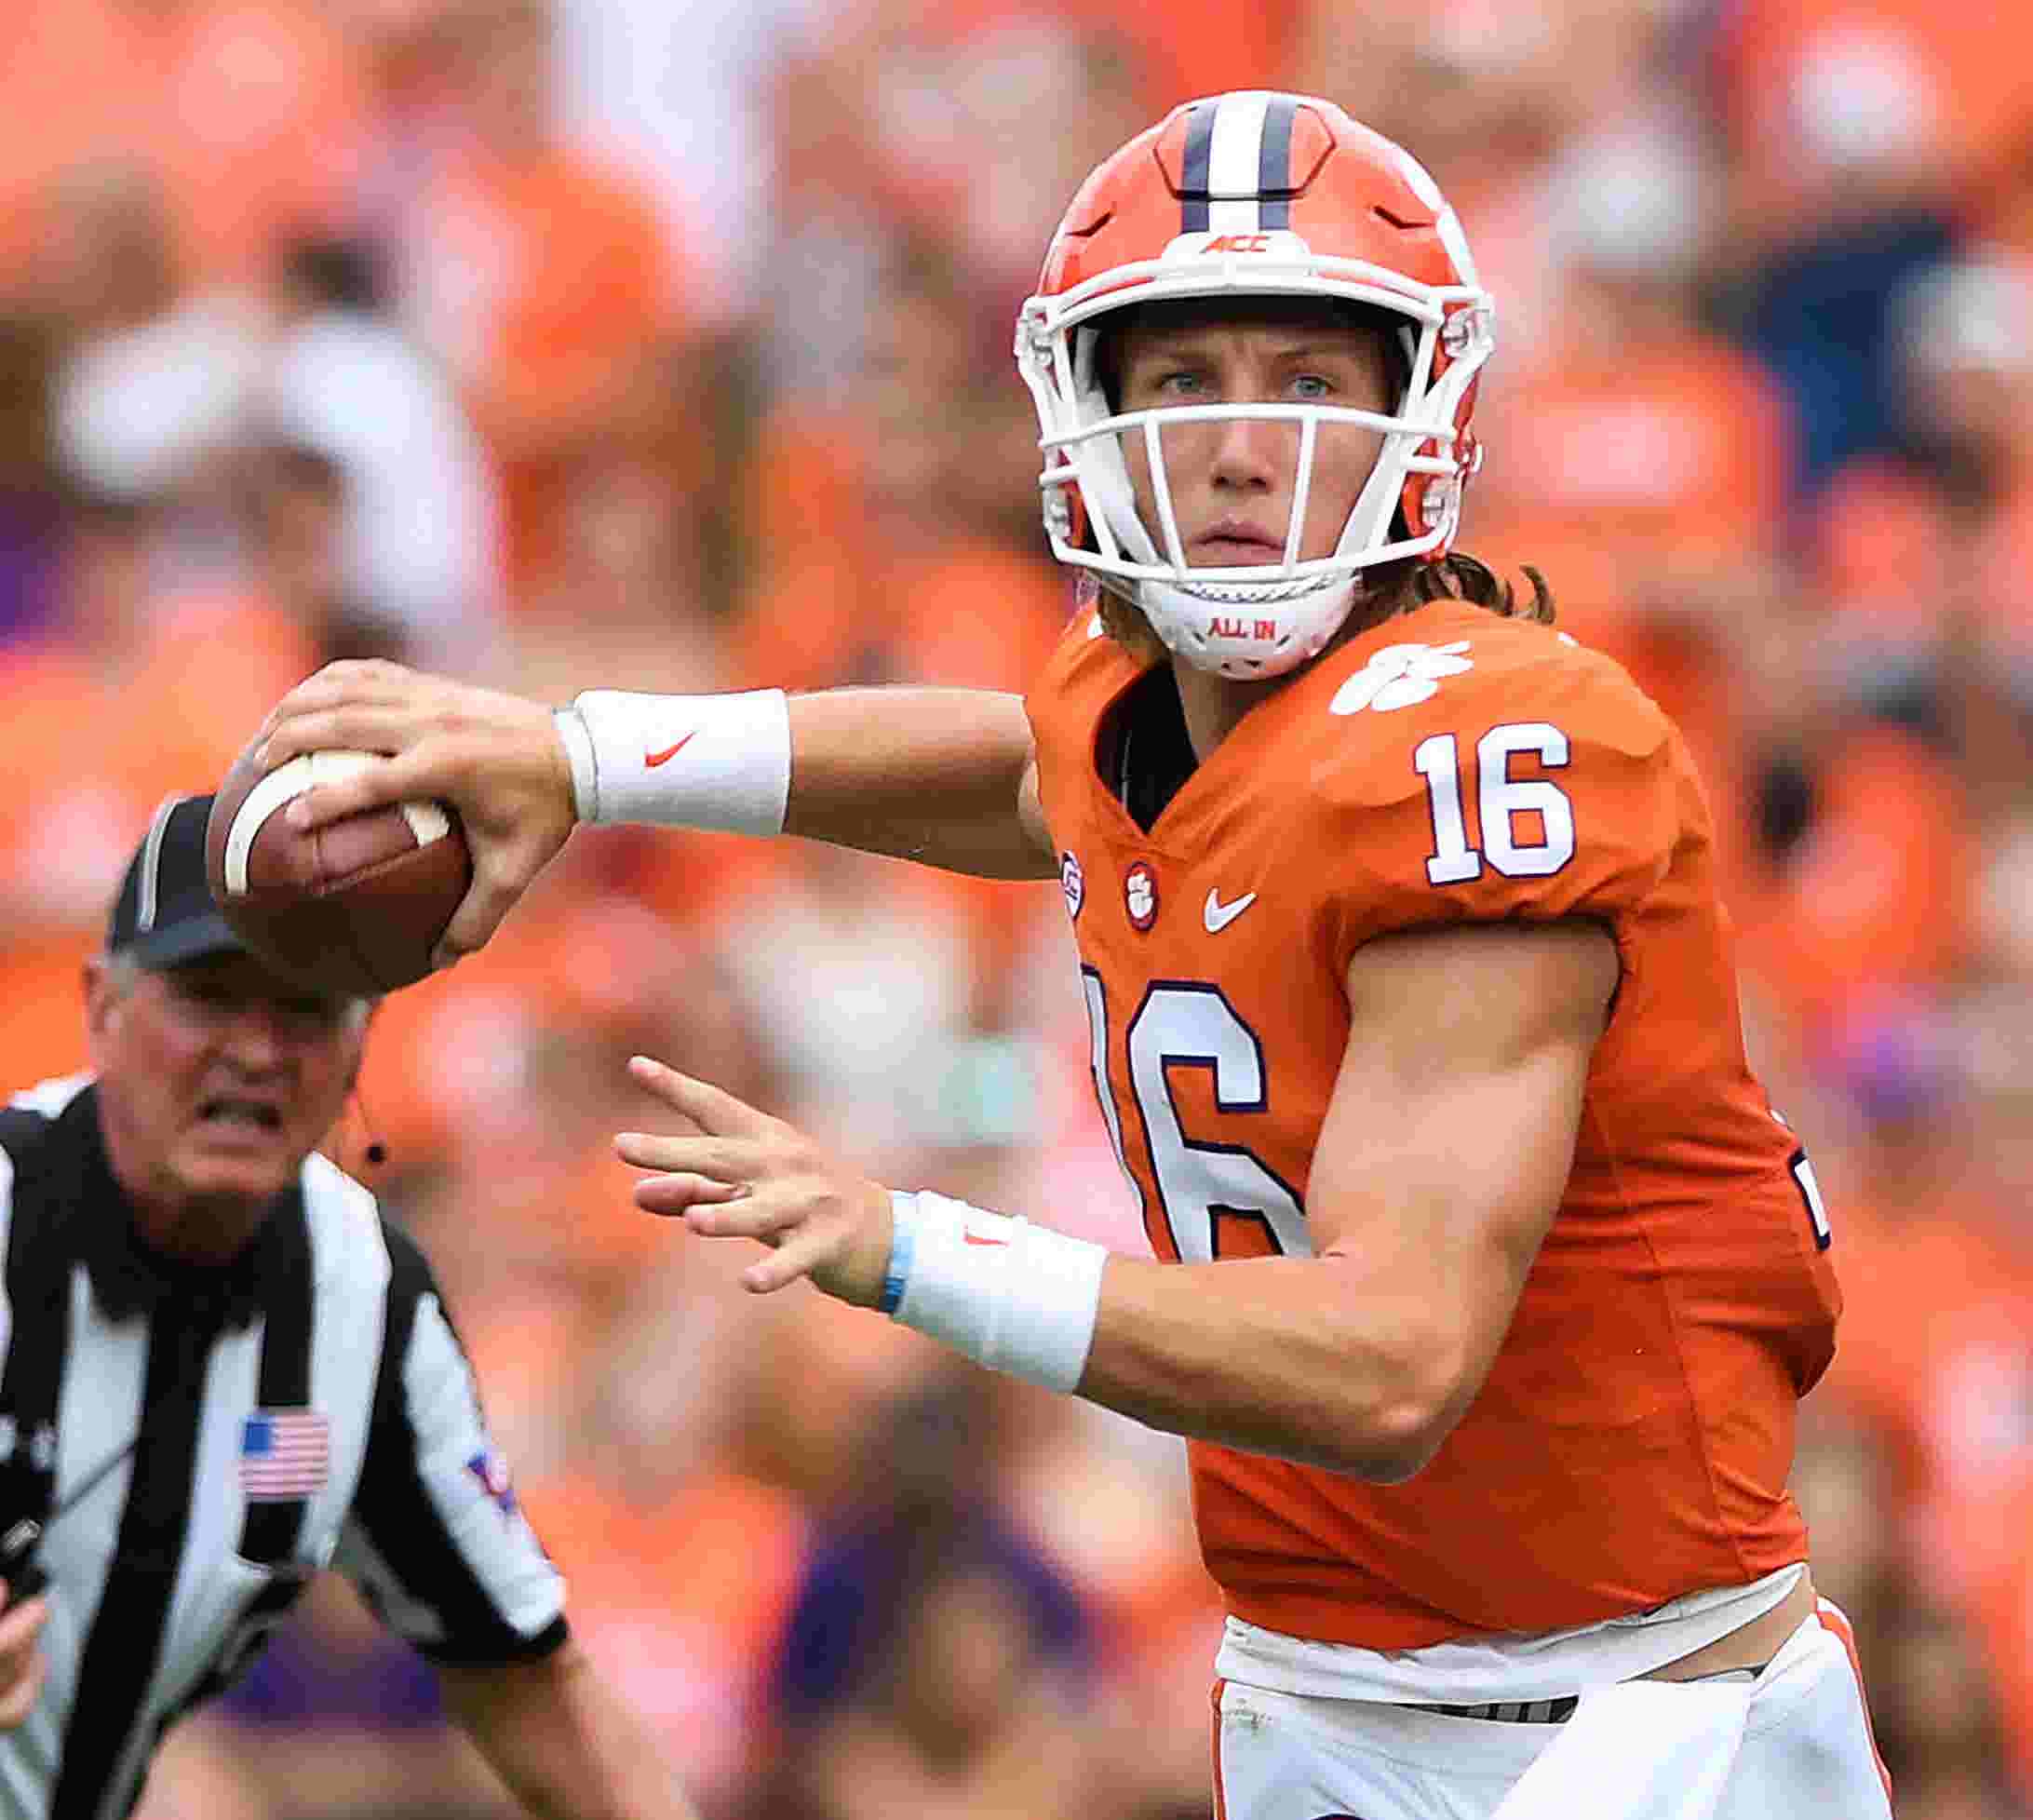 Clemson Quarterback Kelly Bryant Says He Will Transfer After Demotion